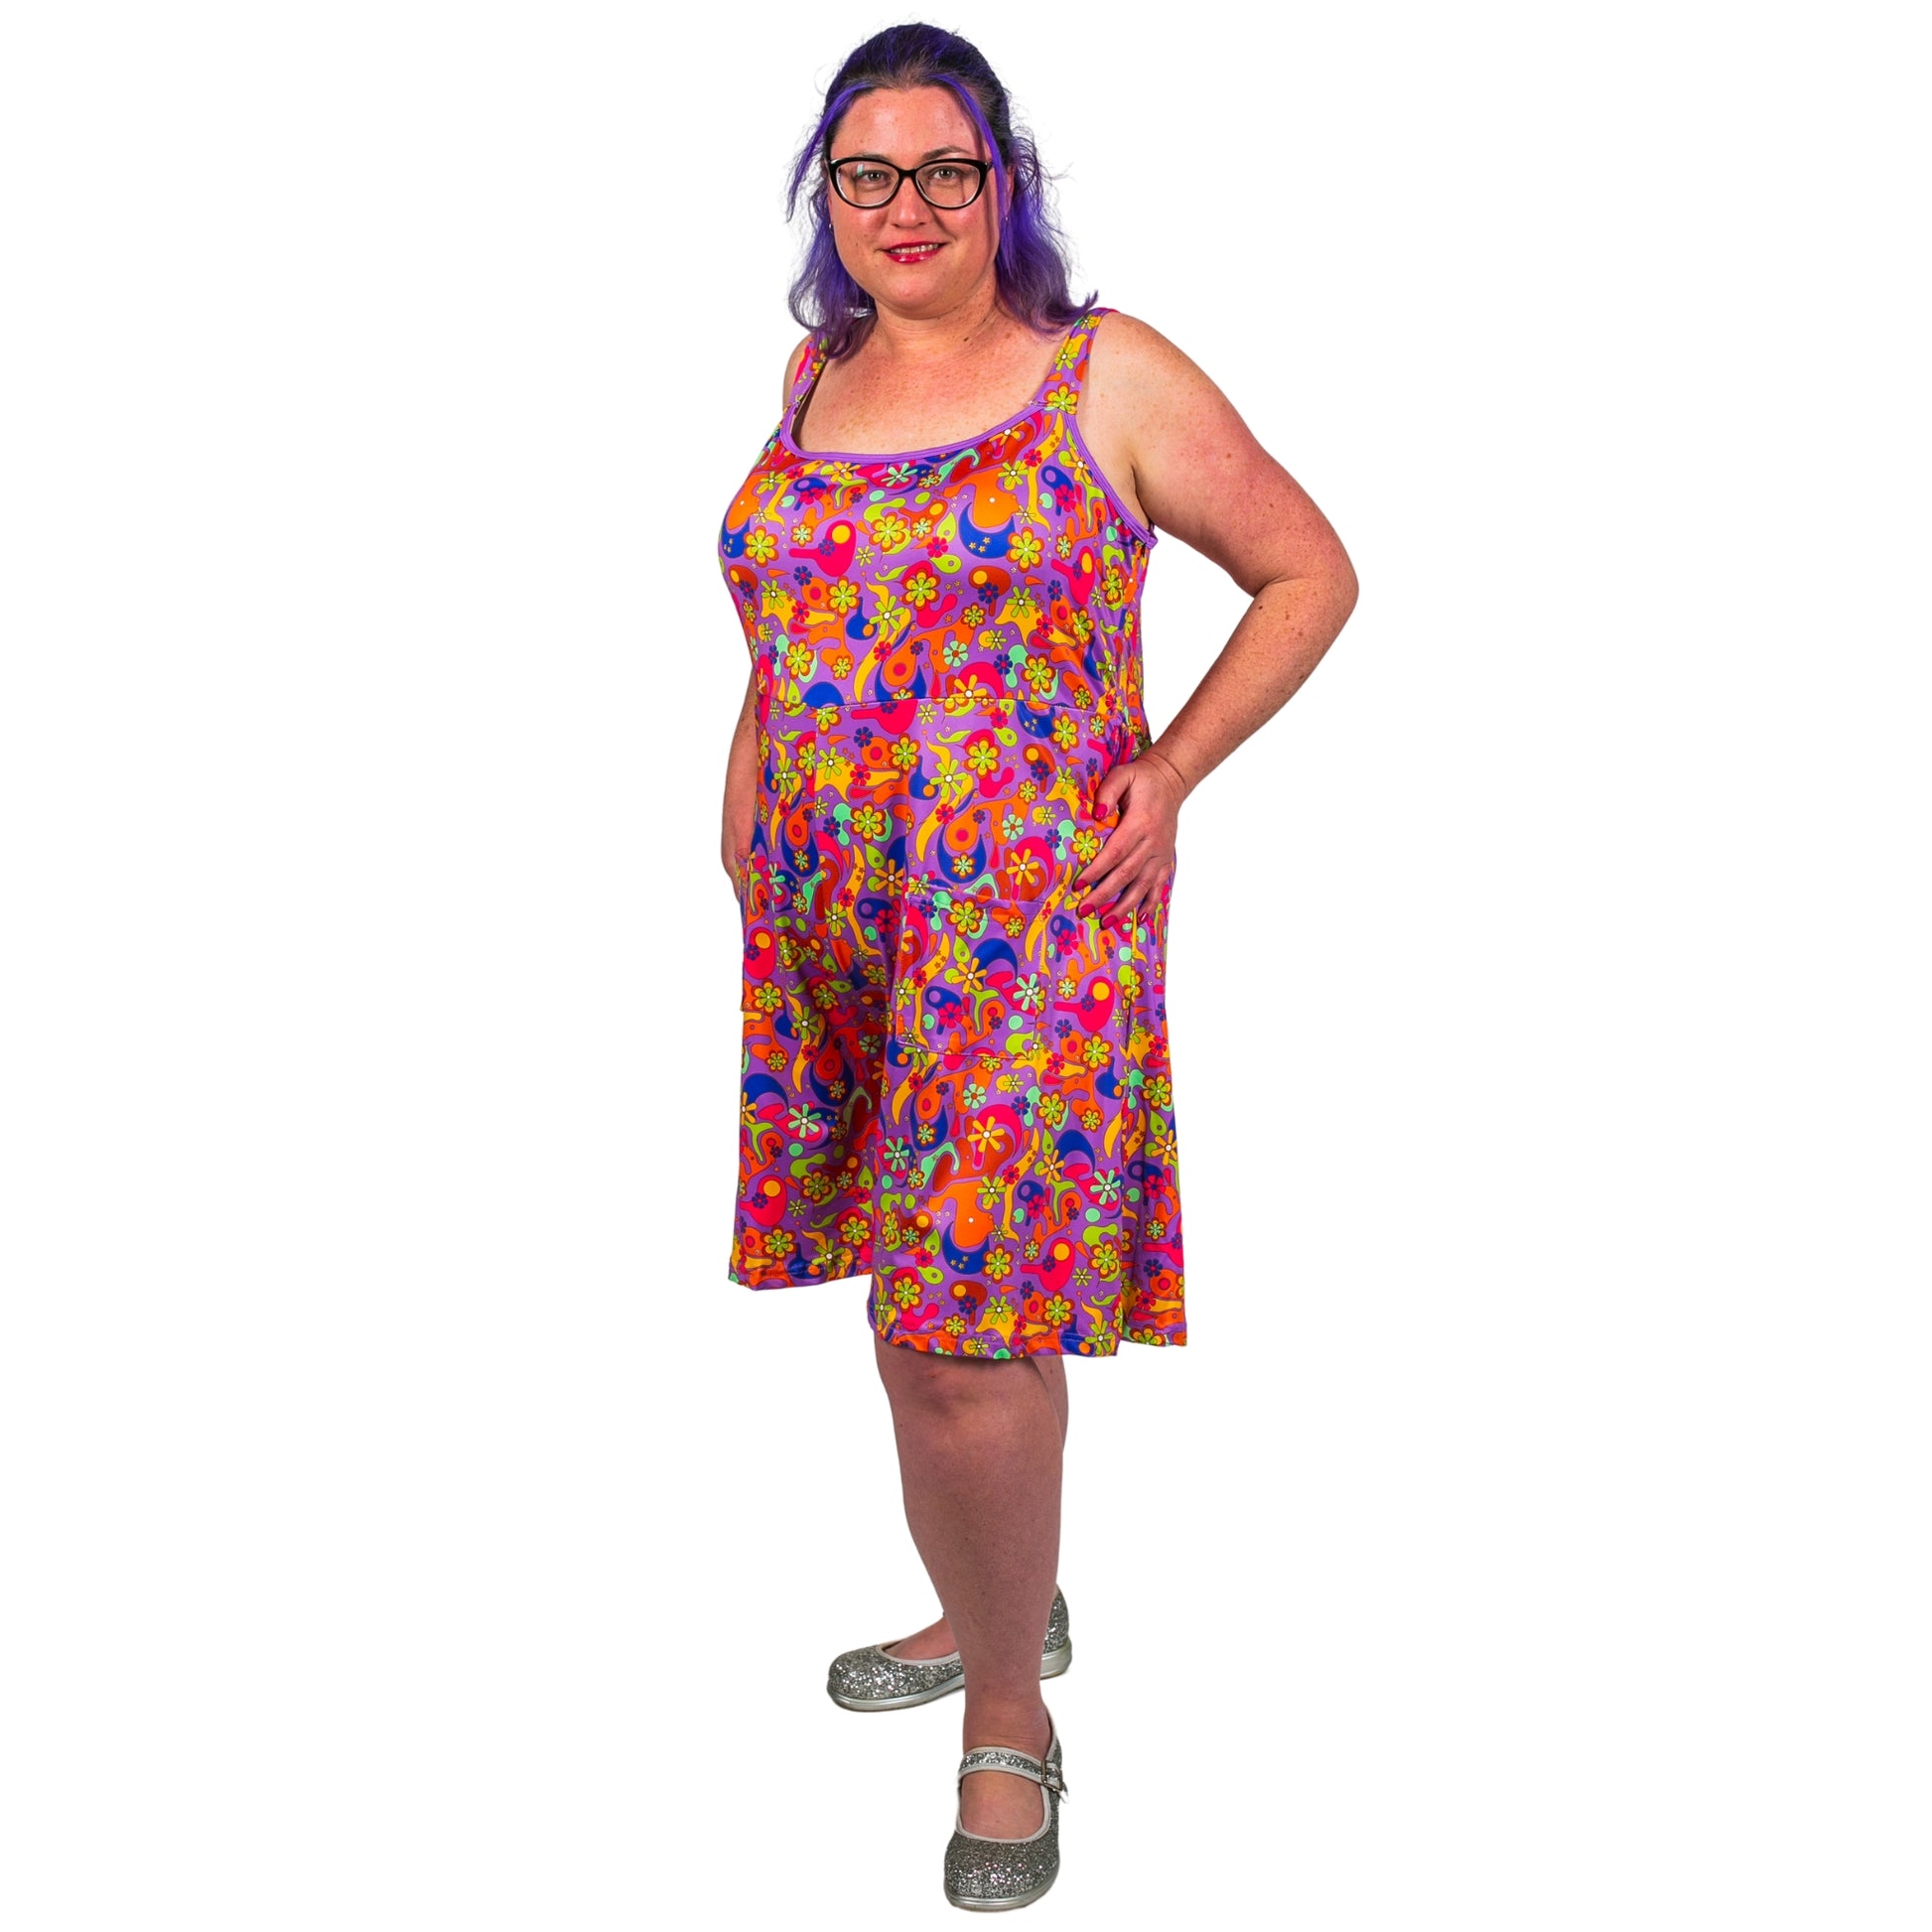 Flower Power Romper by RainbowsAndFairies.com.au (Psychedelic - Woodstock - Floral - Playsuit - Shorts - Kitsch - Rockabilly) - SKU: CL_ROMPR_FLOPO_ORG - Pic-04